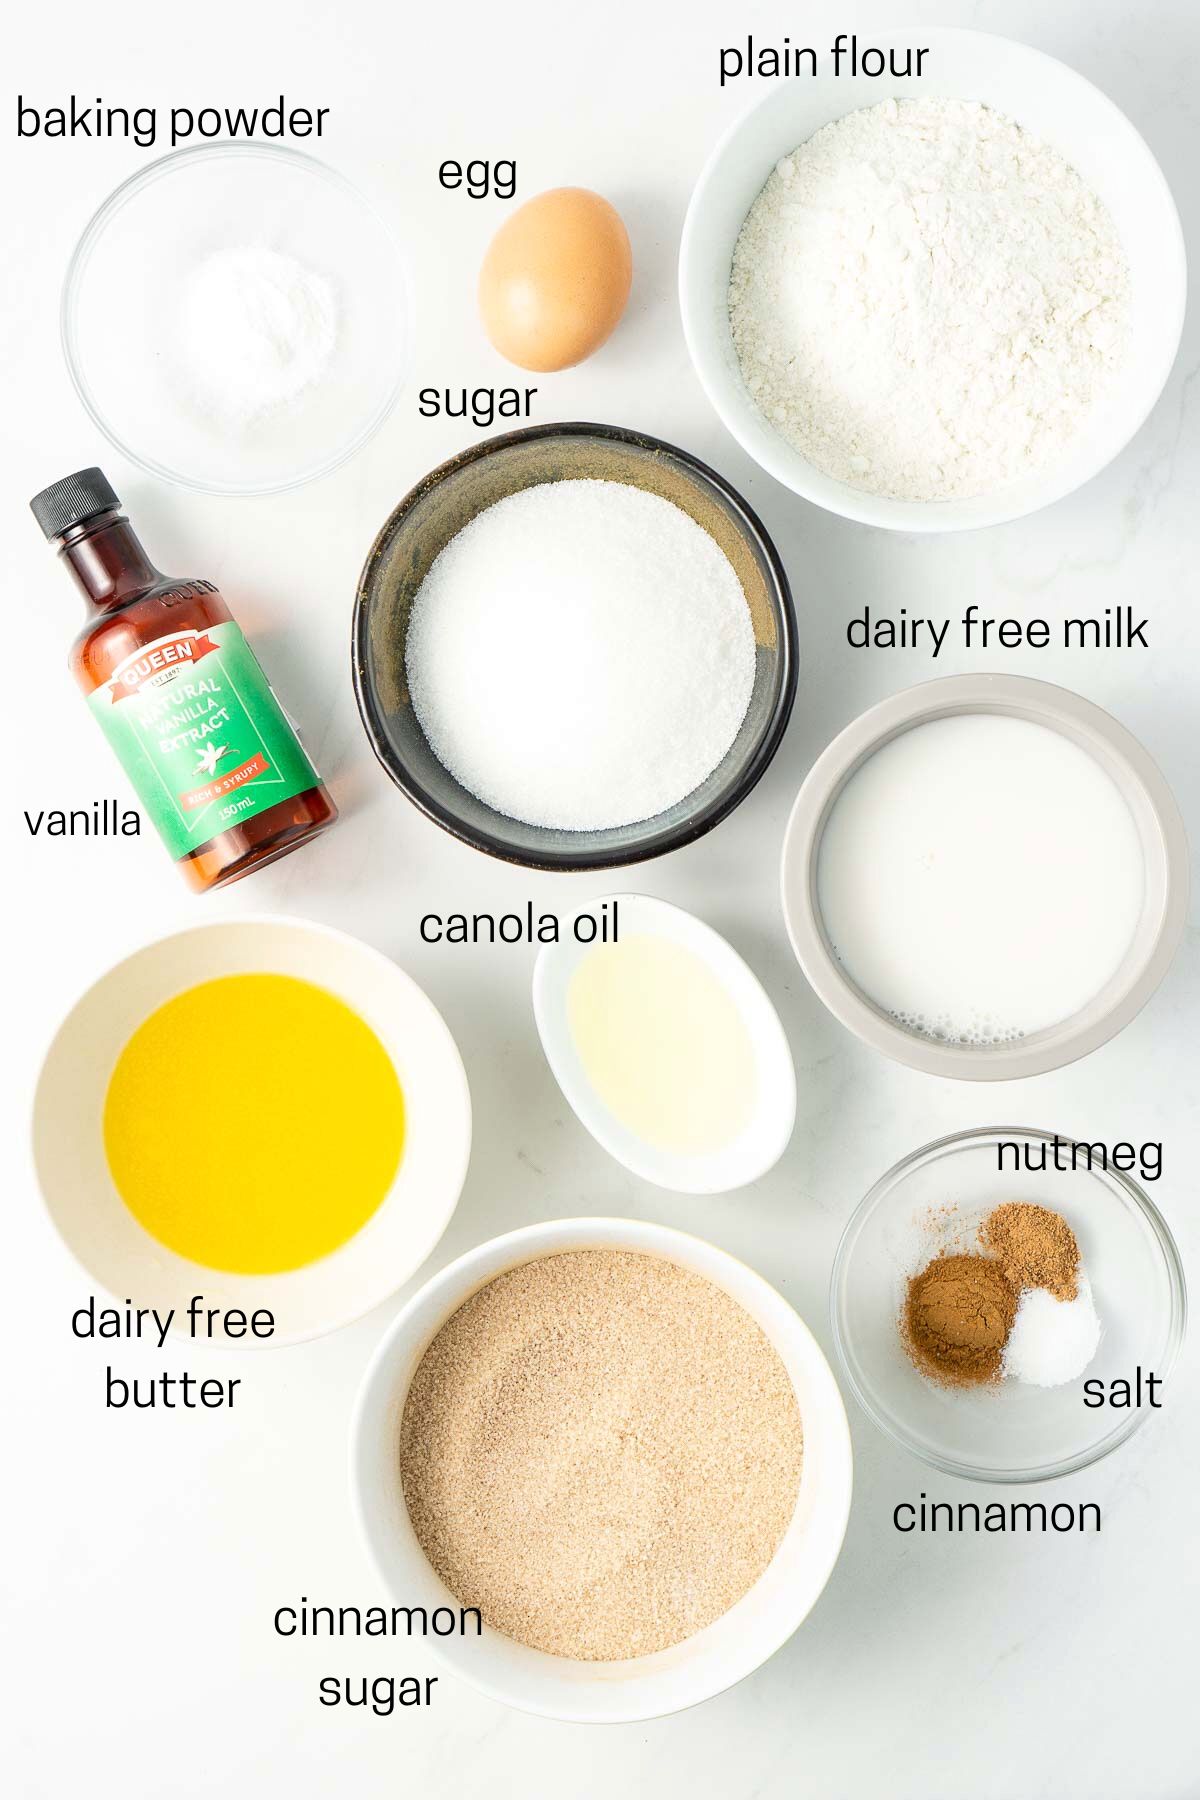 All ingredients needed for cinnamon sugar doughnuts laid out in small bowls.